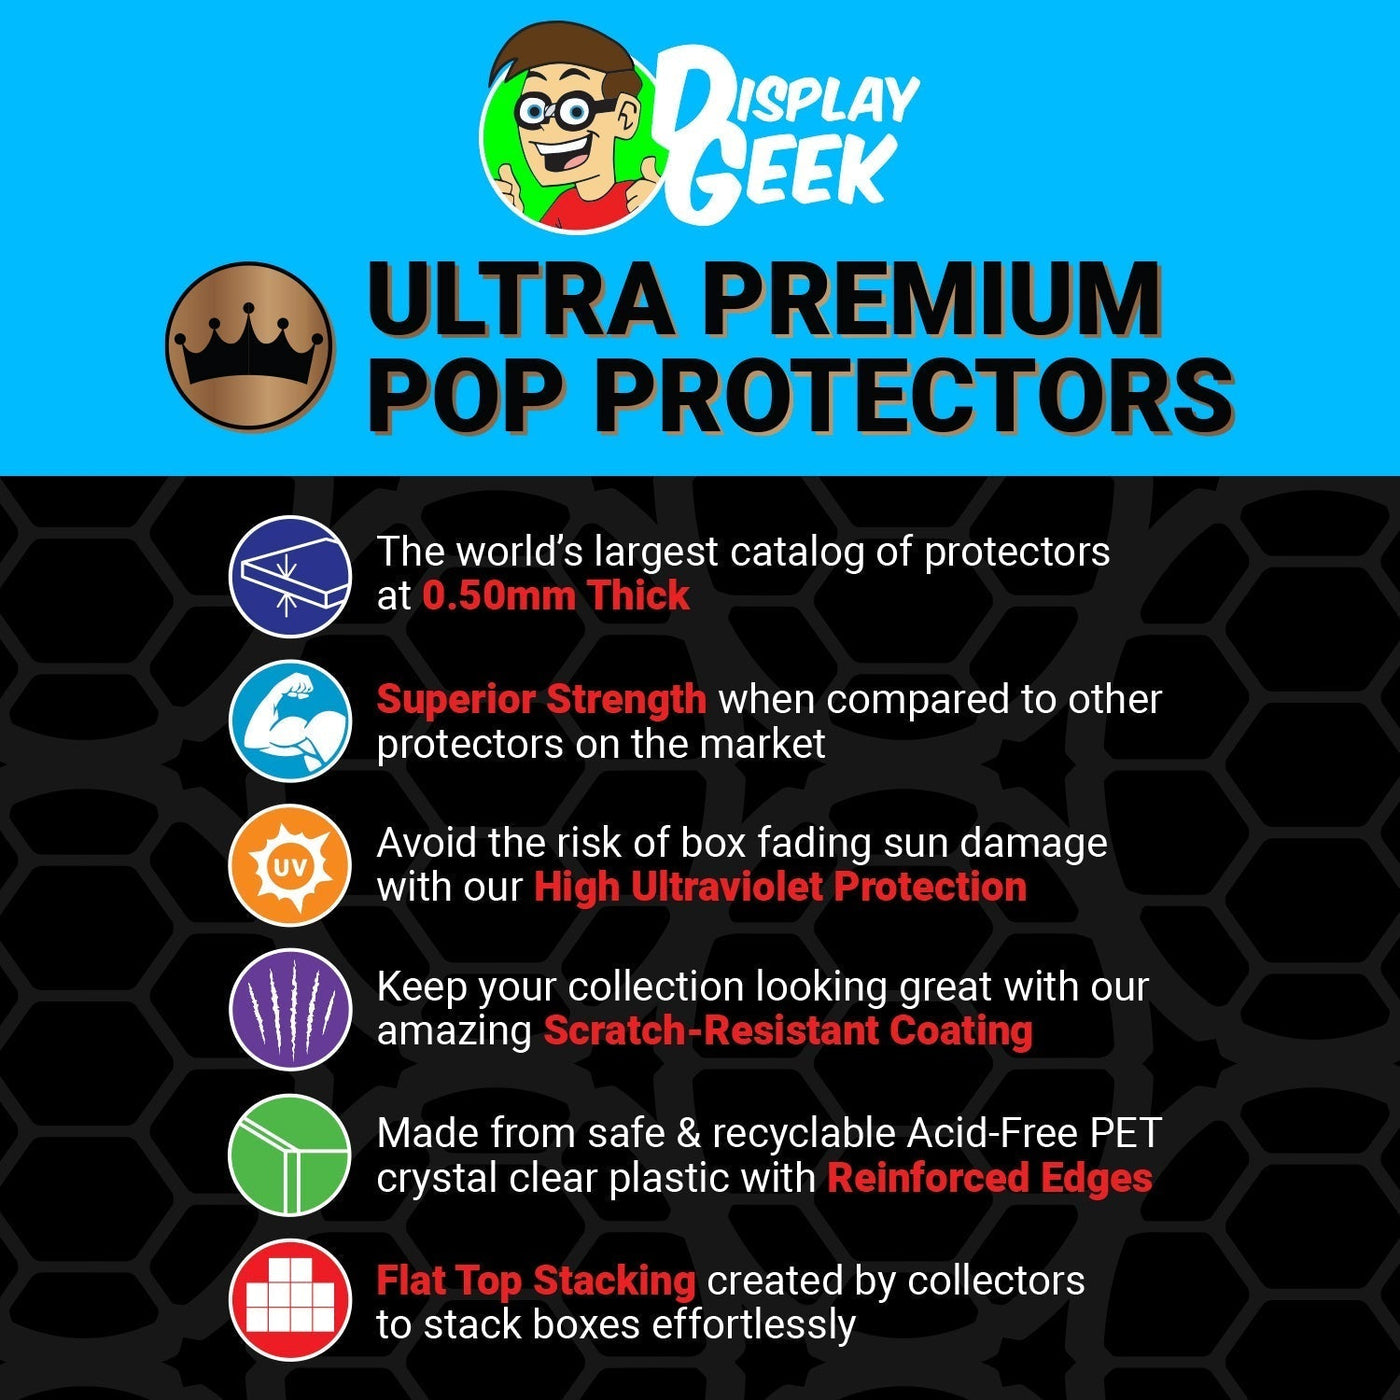 Pop Protector for Formula 1 Sergio Perez #306 Funko Pop Rides on The Protector Guide App by Display Geek